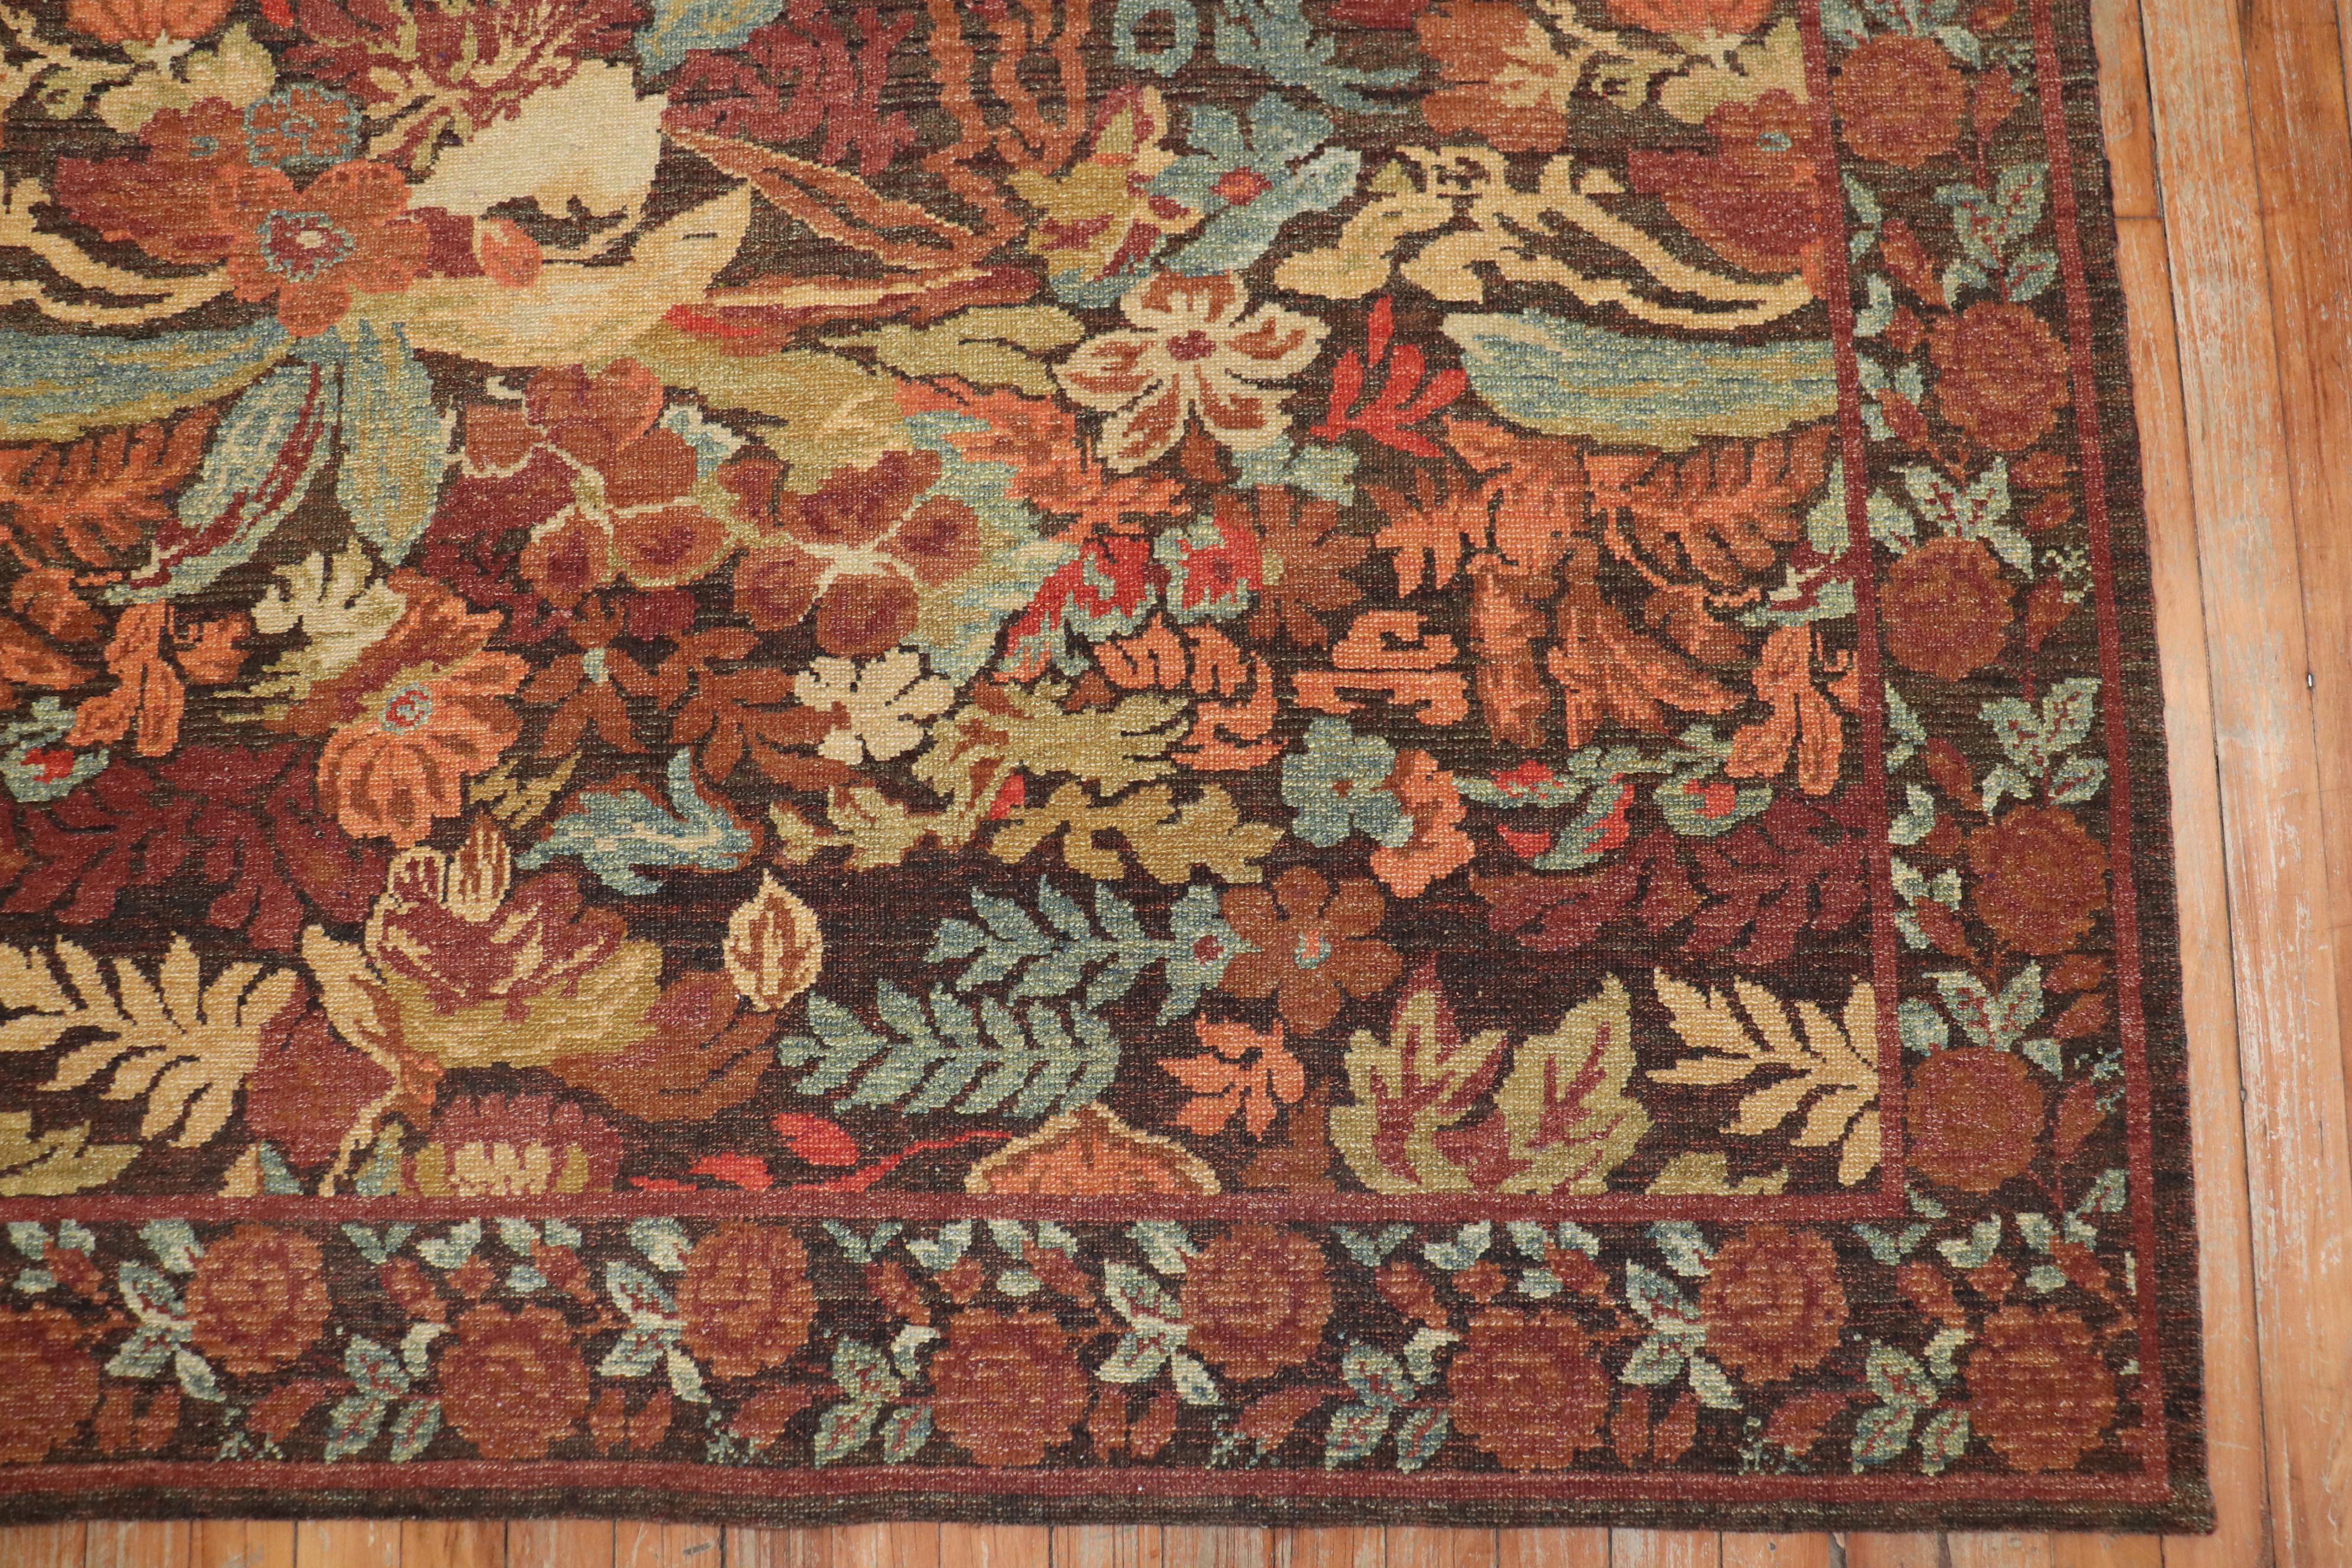 21st century Turkish contemporary wool rug with a an all-over floral design in field and border with autumn colors.

Measures: 8' x 10'.